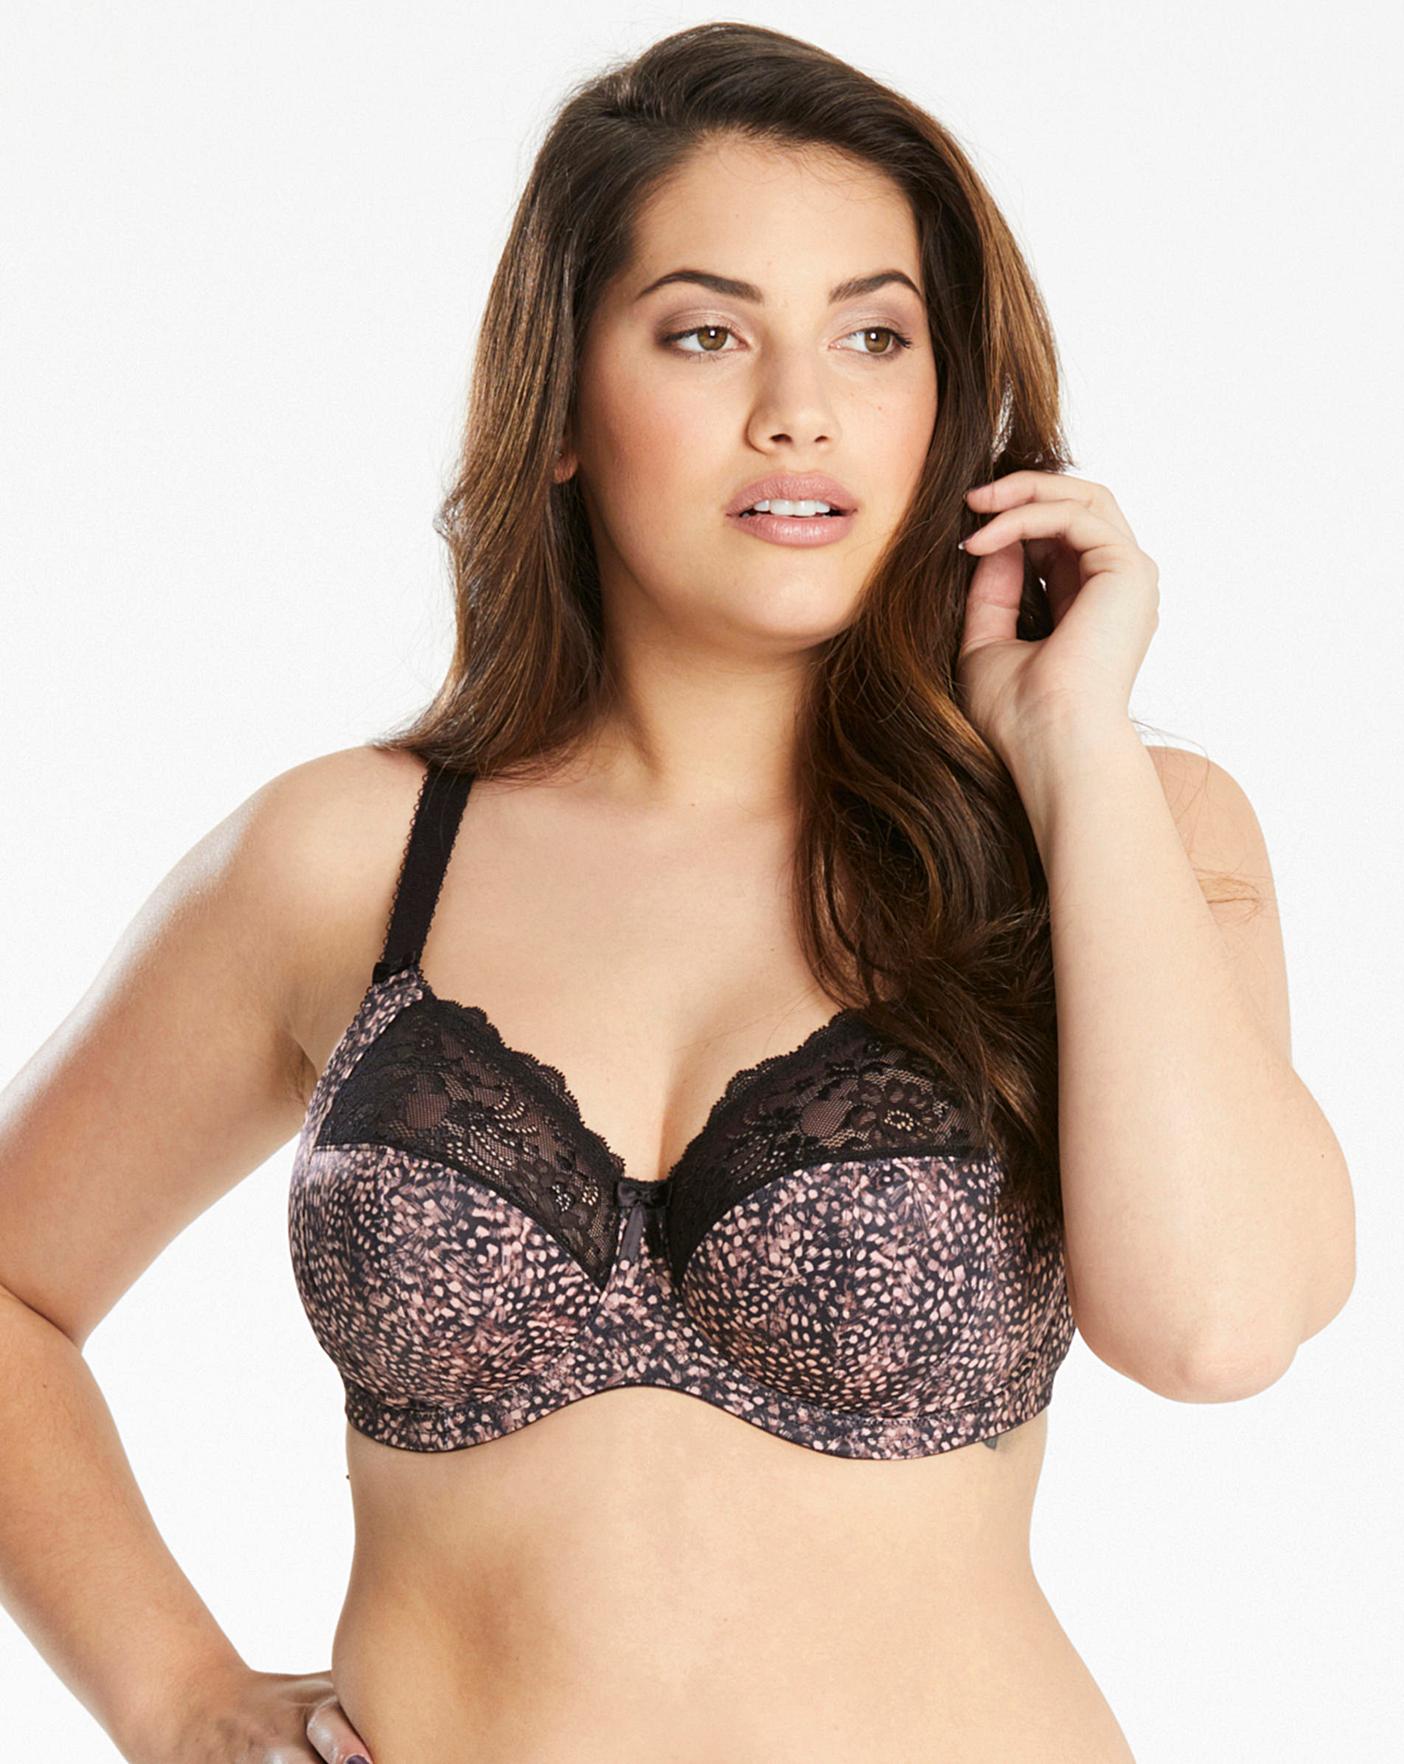 Chic and refined, the Elomi Morgan wired bra features a subtle animal print...